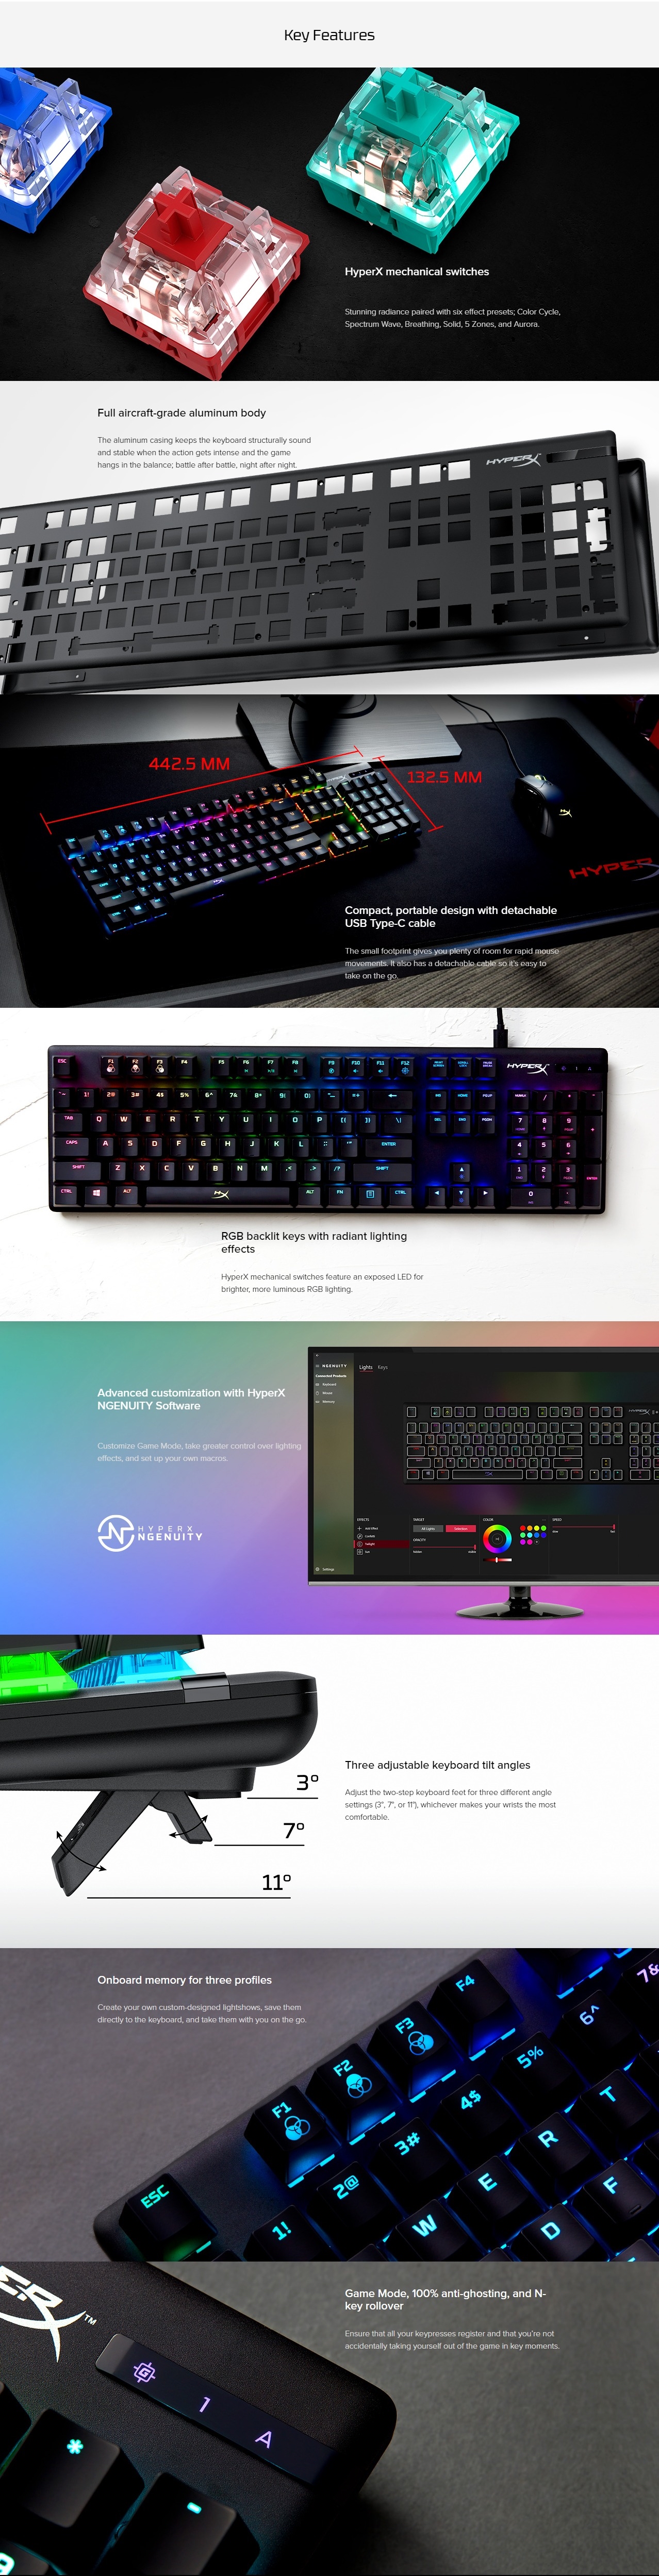 A large marketing image providing additional information about the product HyperX Alloy Origins Mechanical Gaming Keyboard - HyperX Red Switch - Additional alt info not provided